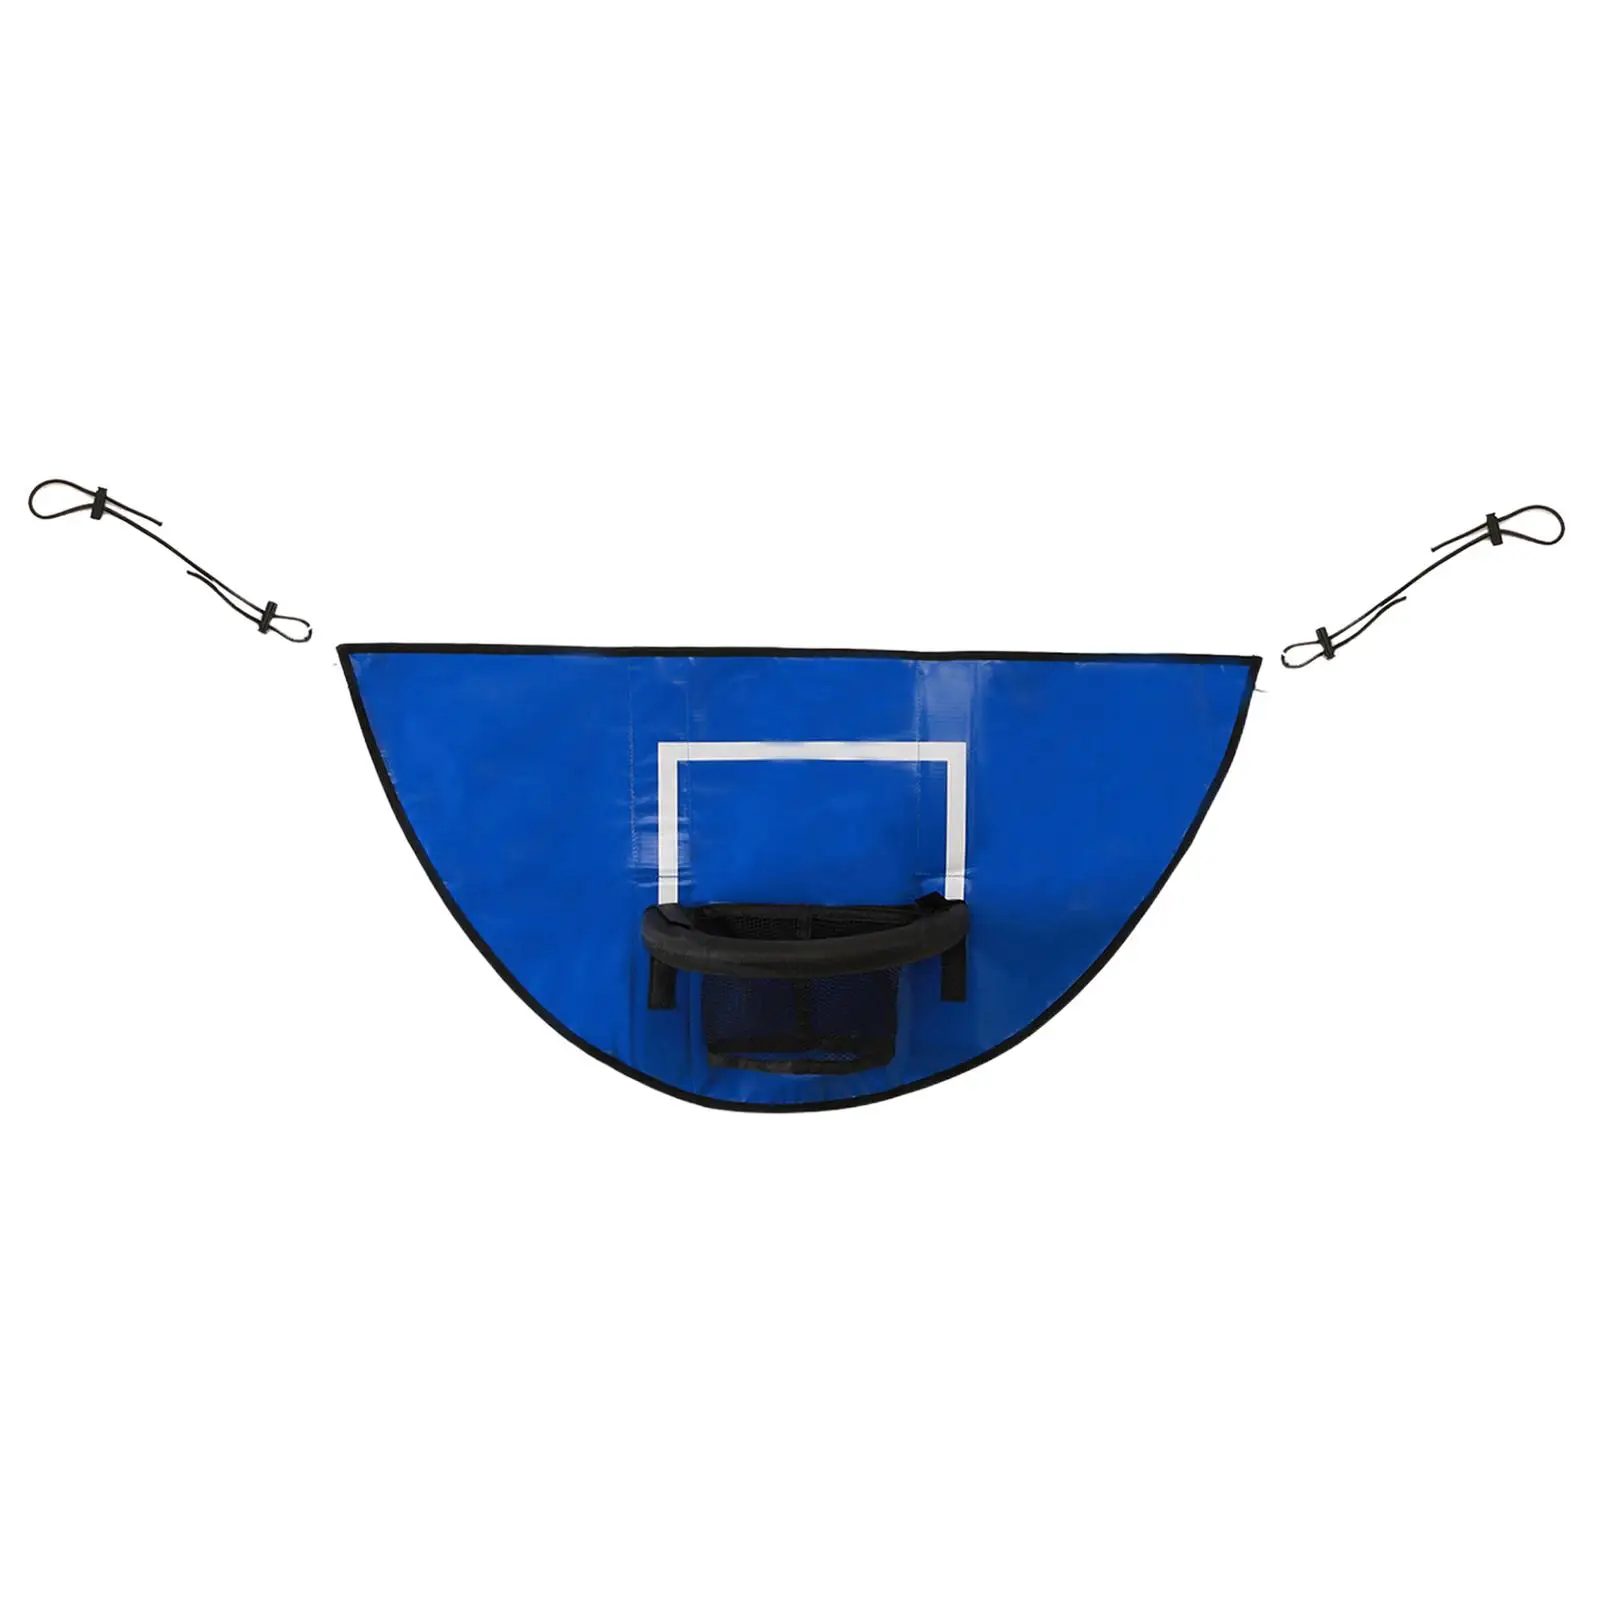 Basketball Hoop Attachment for Trampoline with Net Universal Baseboard for